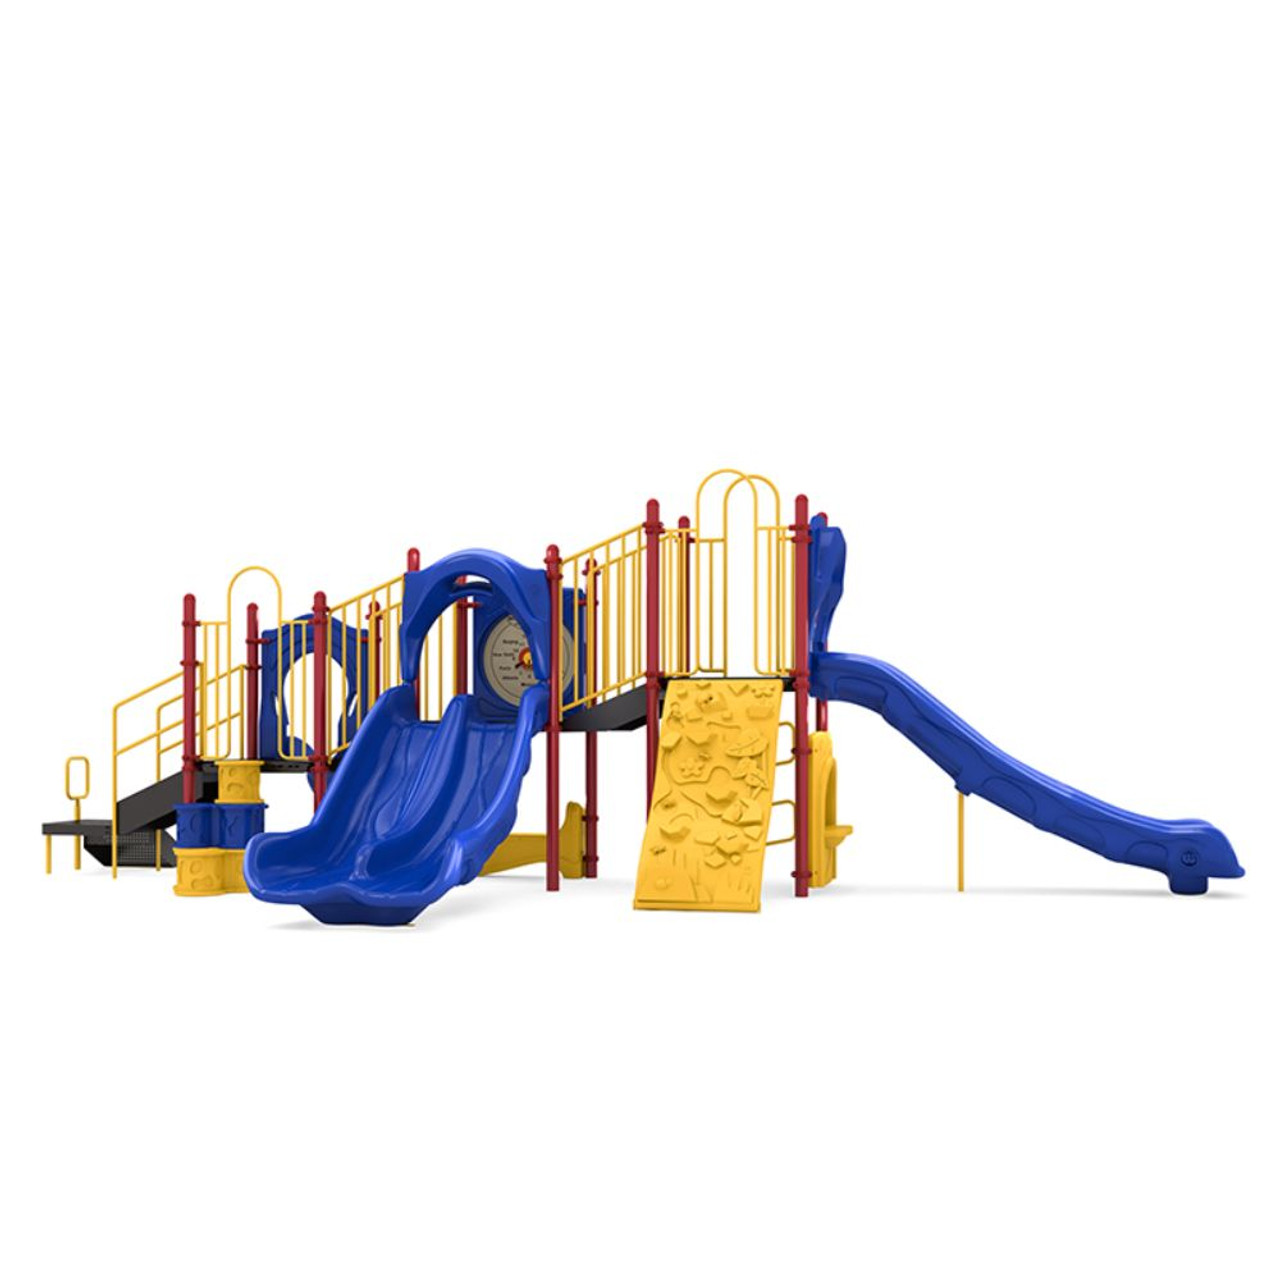 Shady Pines Playset - primary - back